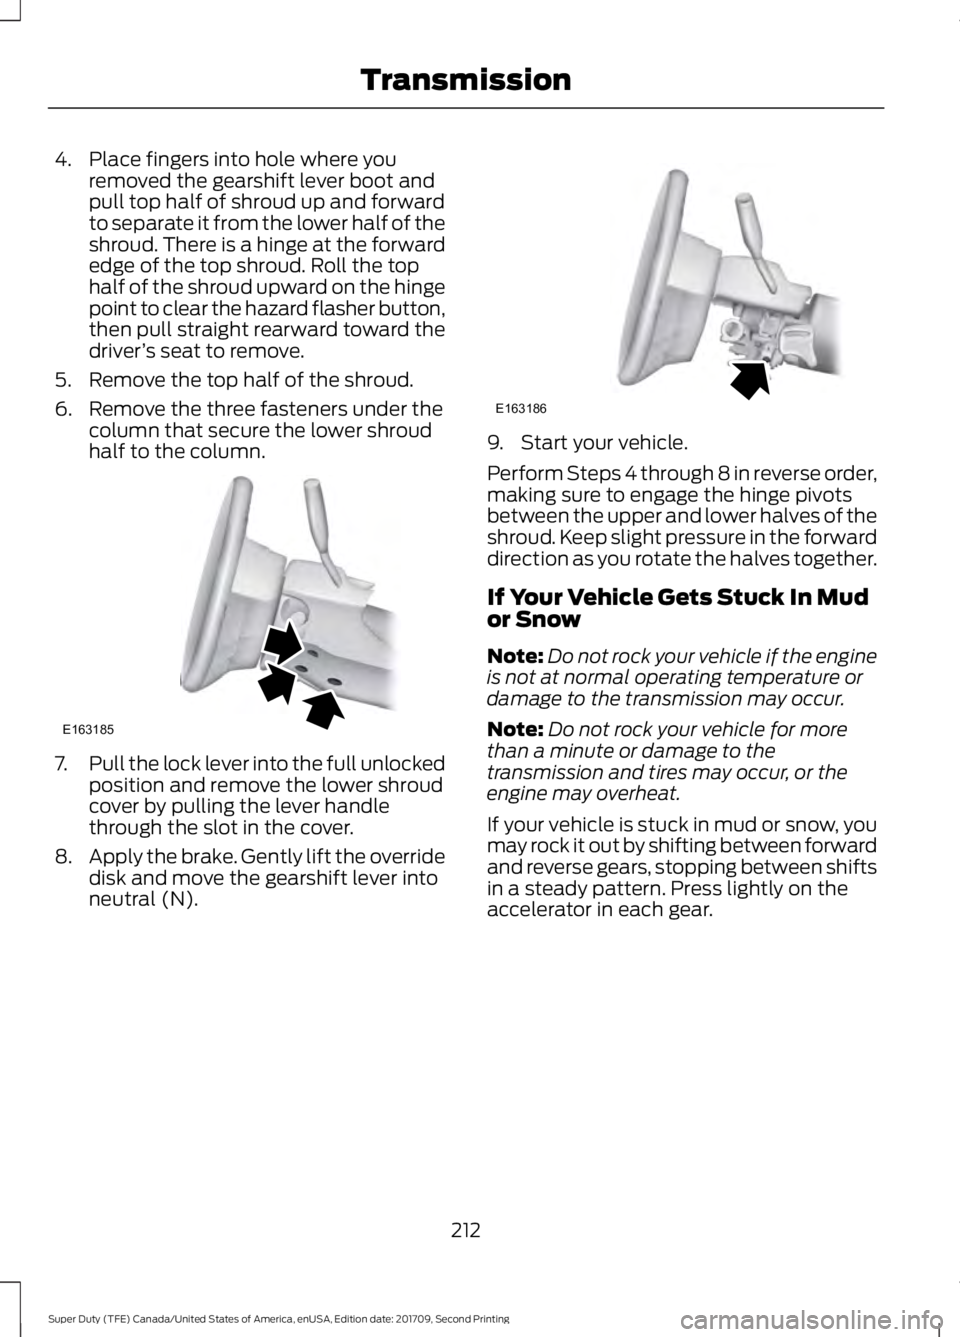 FORD F-450 2018  Owners Manual 4. Place fingers into hole where you
removed the gearshift lever boot and
pull top half of shroud up and forward
to separate it from the lower half of the
shroud. There is a hinge at the forward
edge 